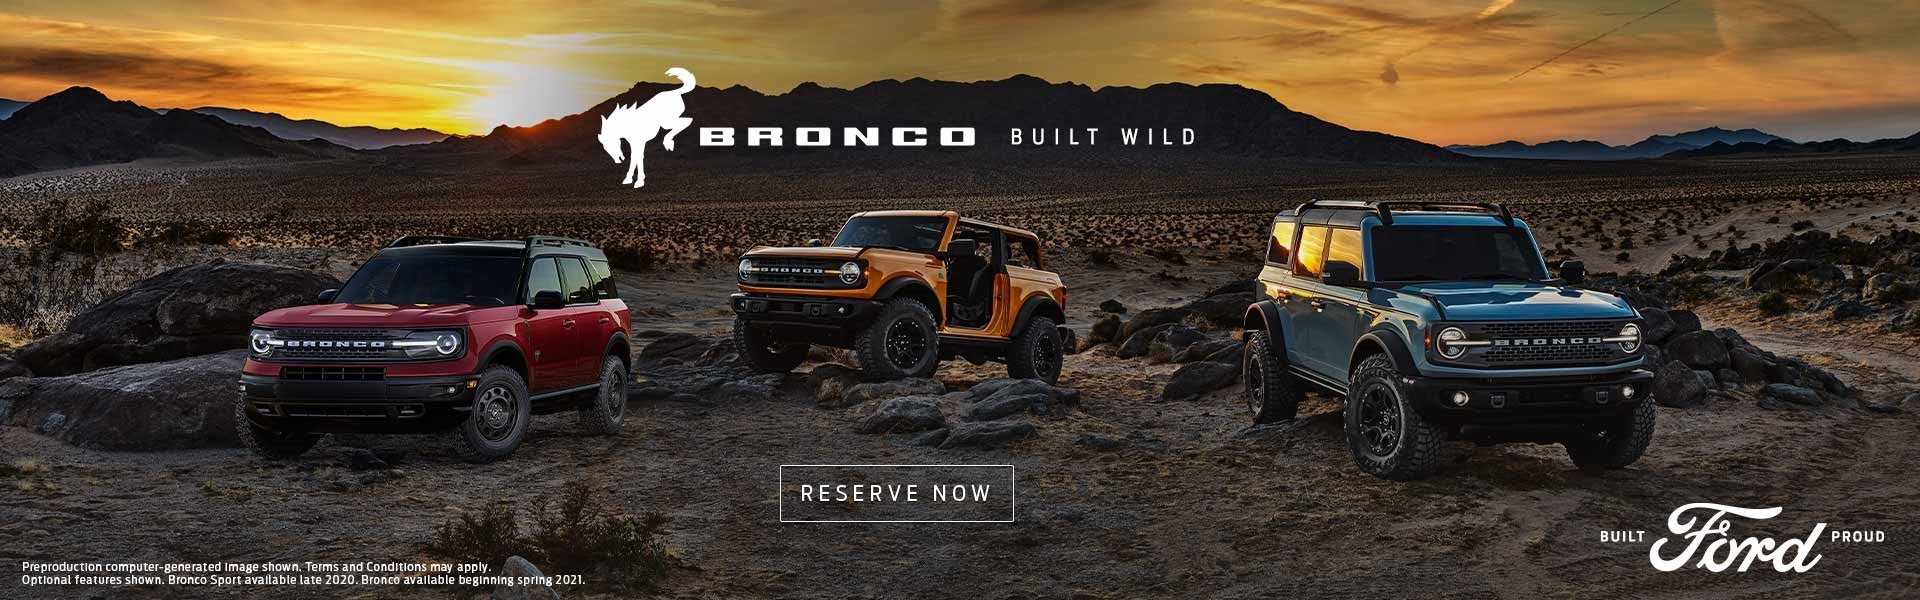 Reserve the all new 2021 Bronco